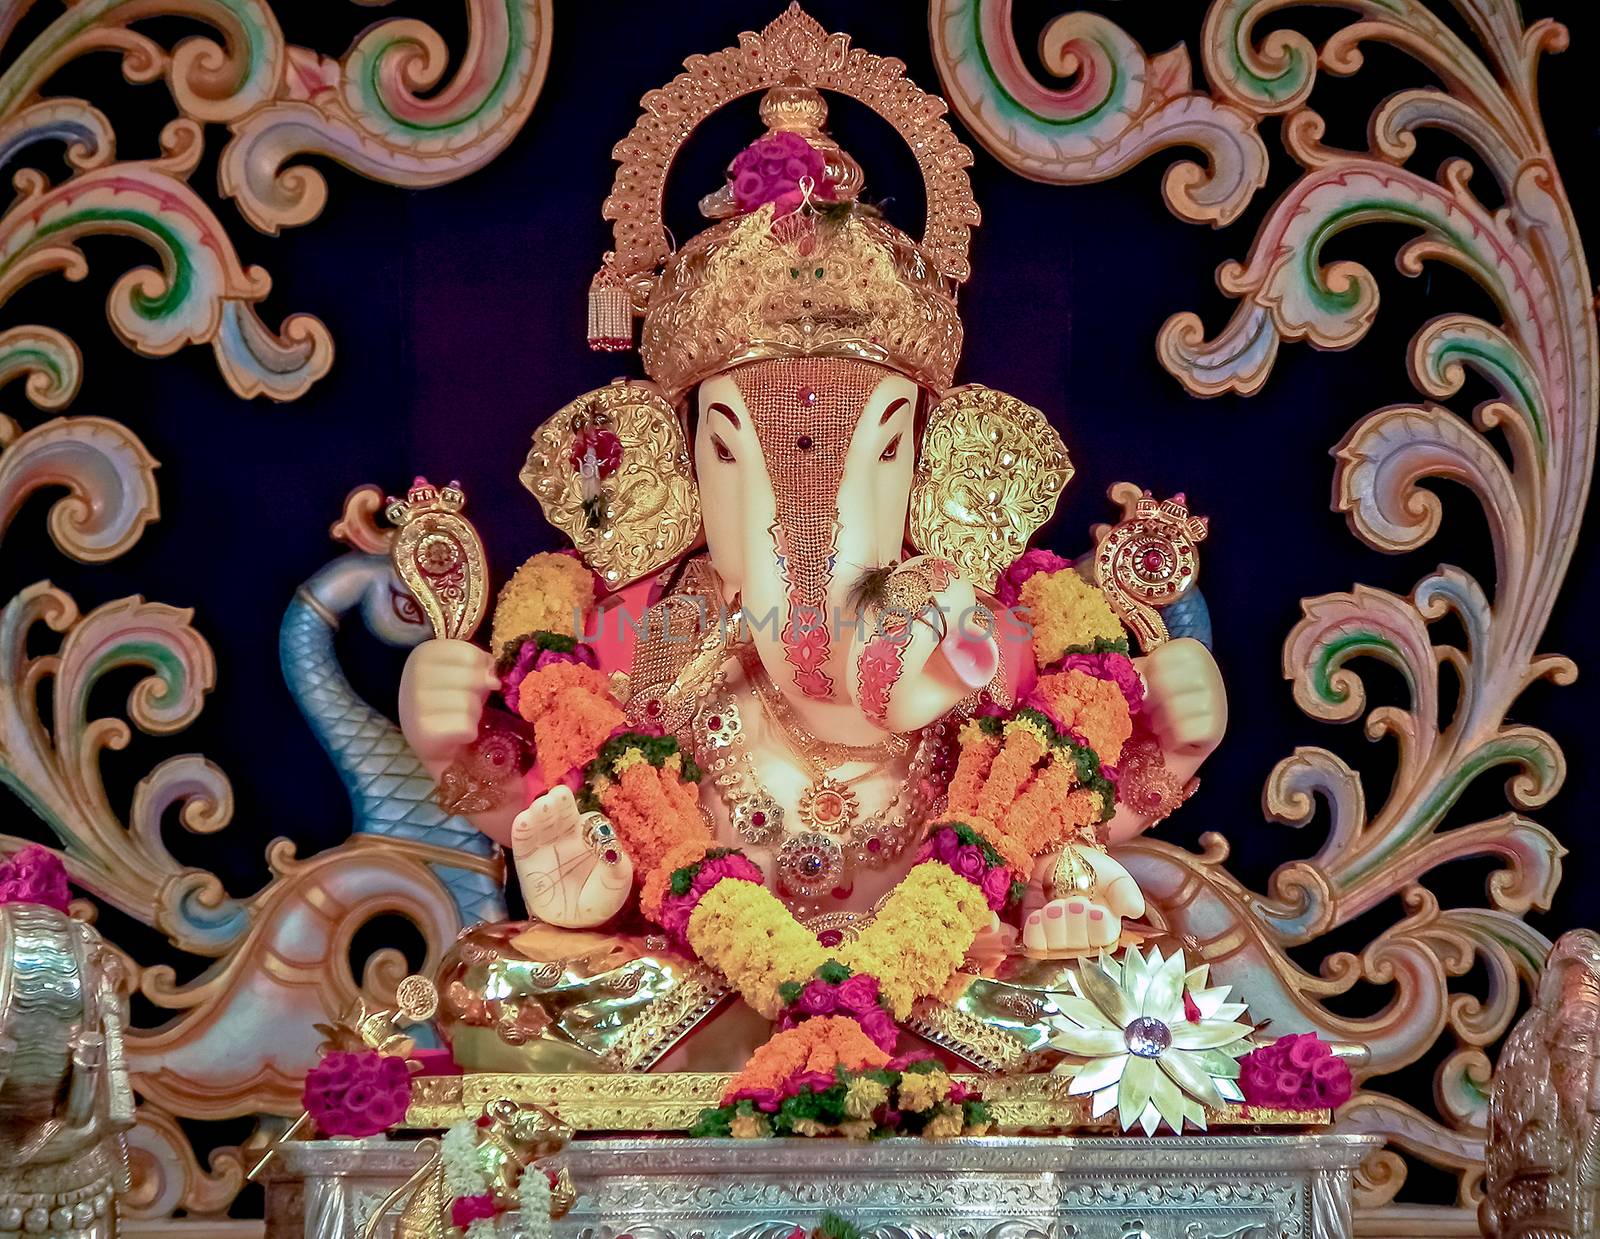 Closeup view of decorated and garlanded idol of Hindu God Ganesha in Pune, India.